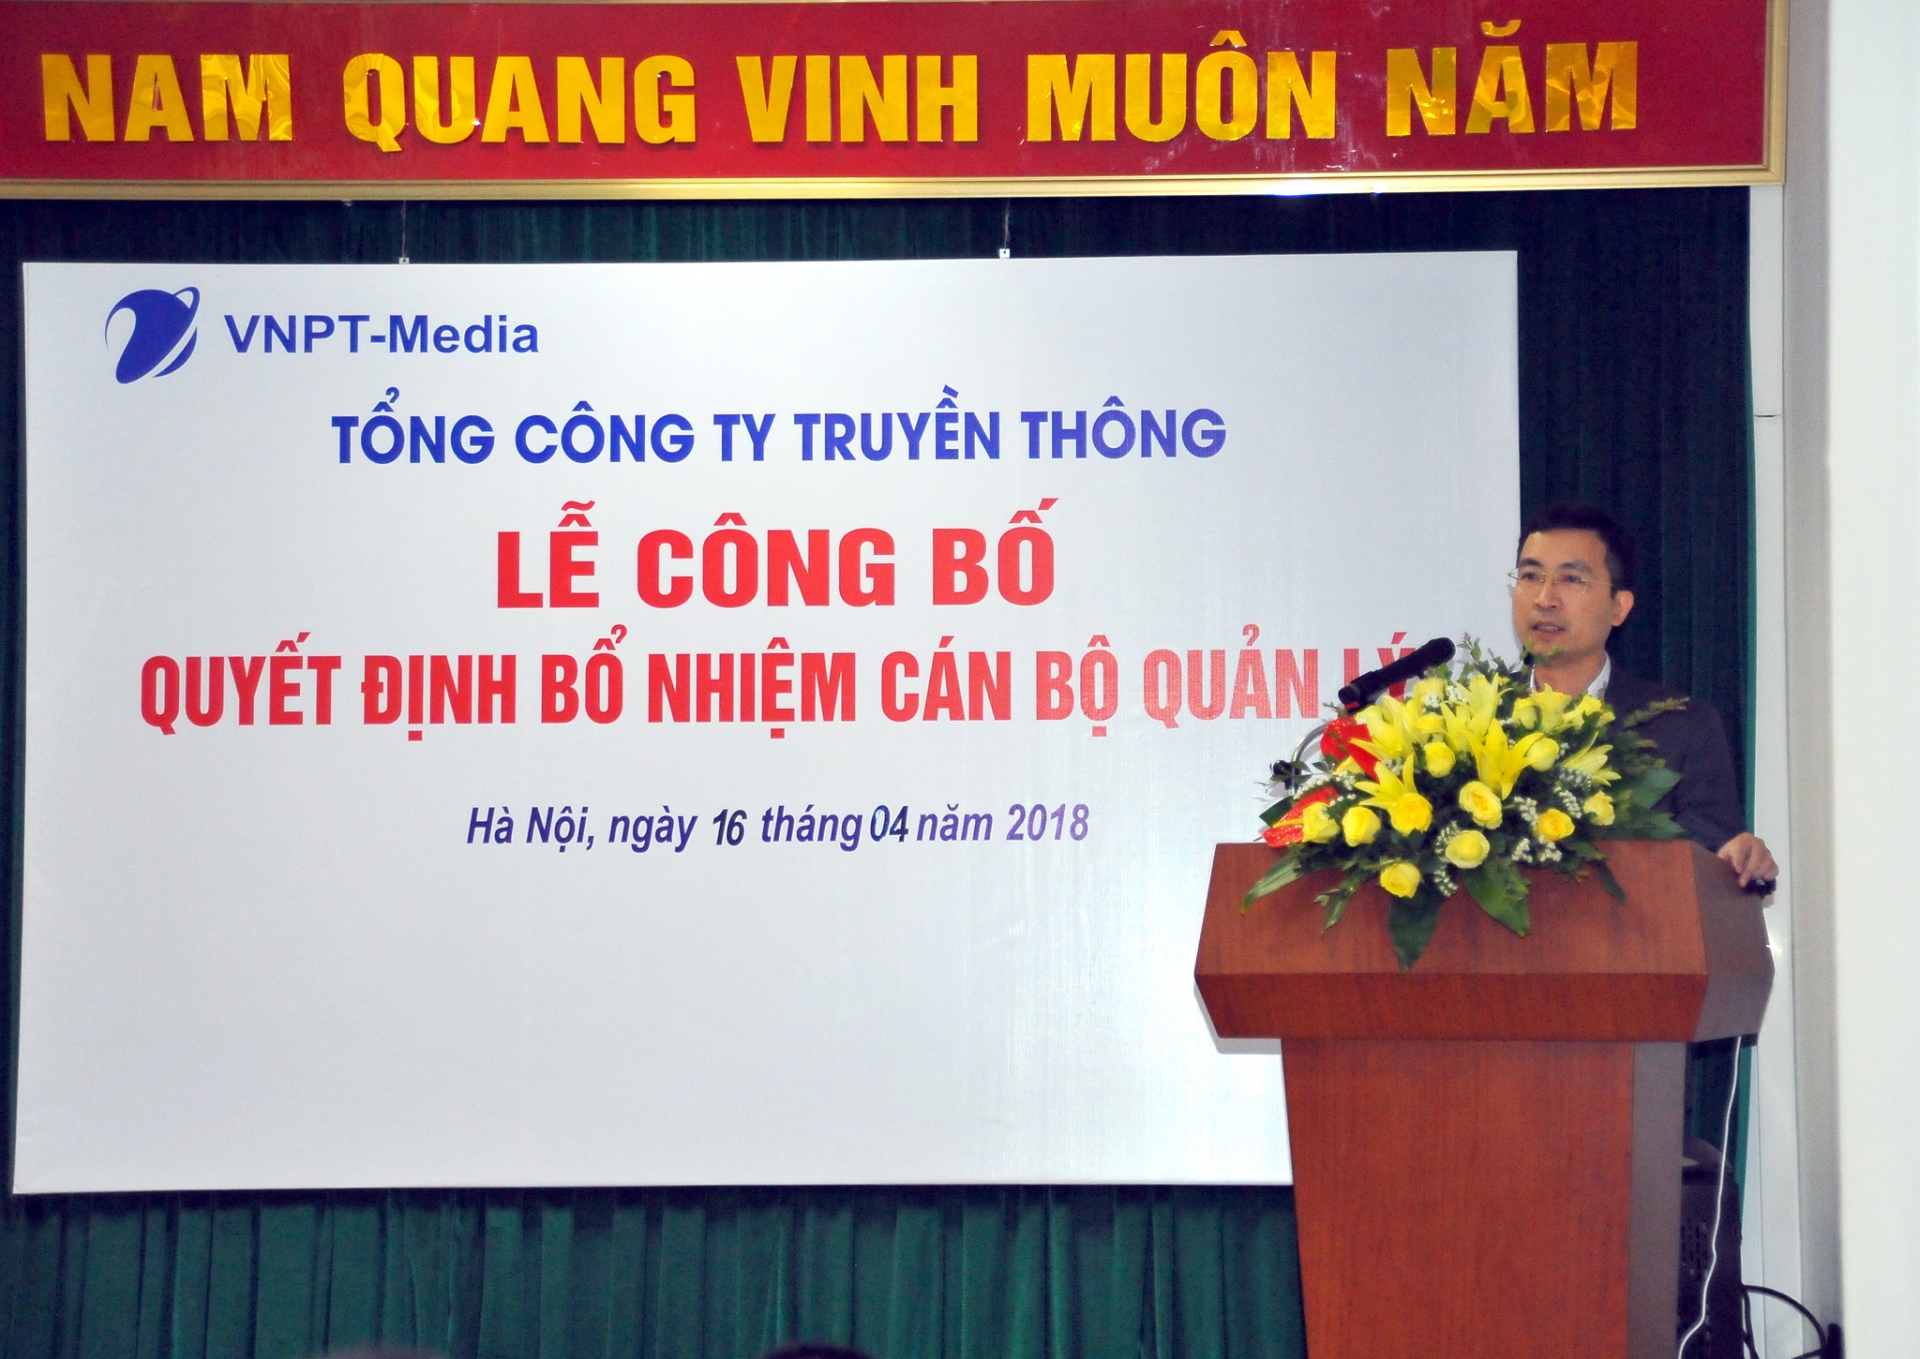 Mr. Duong Thanh Long, Acting General Director of VNPT-Media, speaking at the appointment ceremony